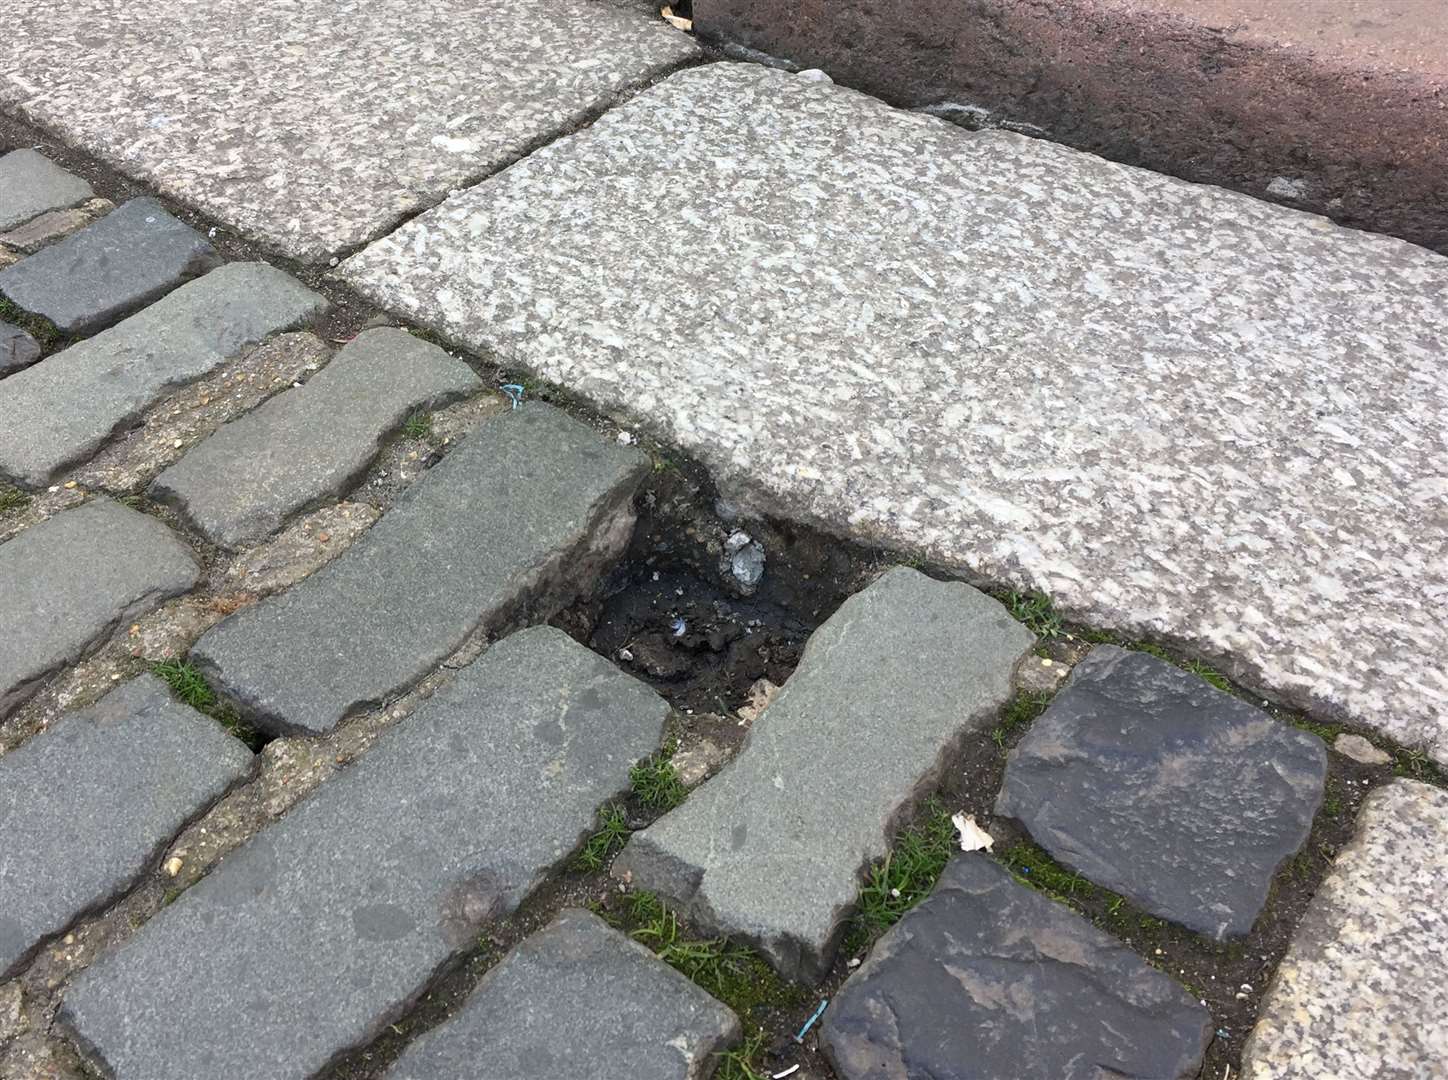 KentOnline visited the site near Canterbury Cathedral, where the cobblestone was missing